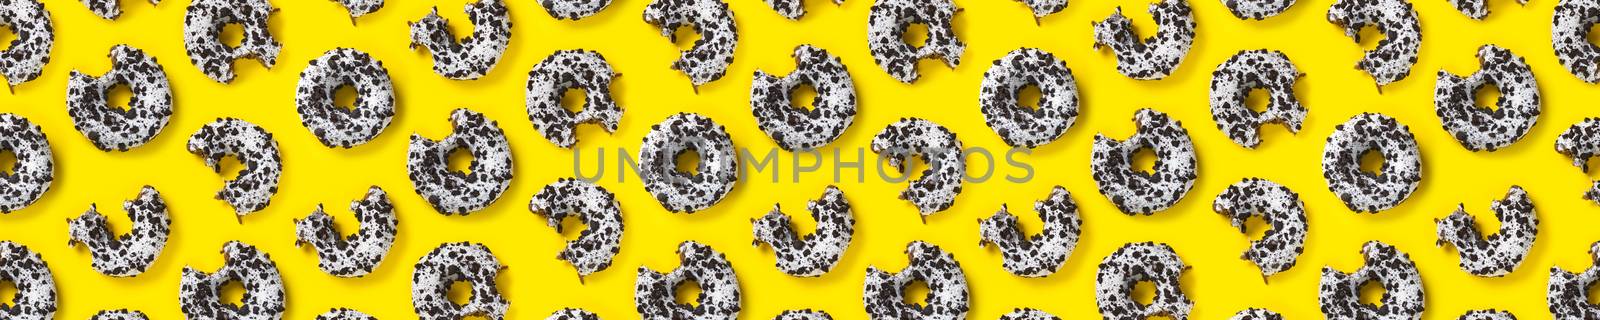 donuts on a yellow background top view. Flat lay of delicious nibbled chocolate donuts. used as donut banner or poster background, not pattern